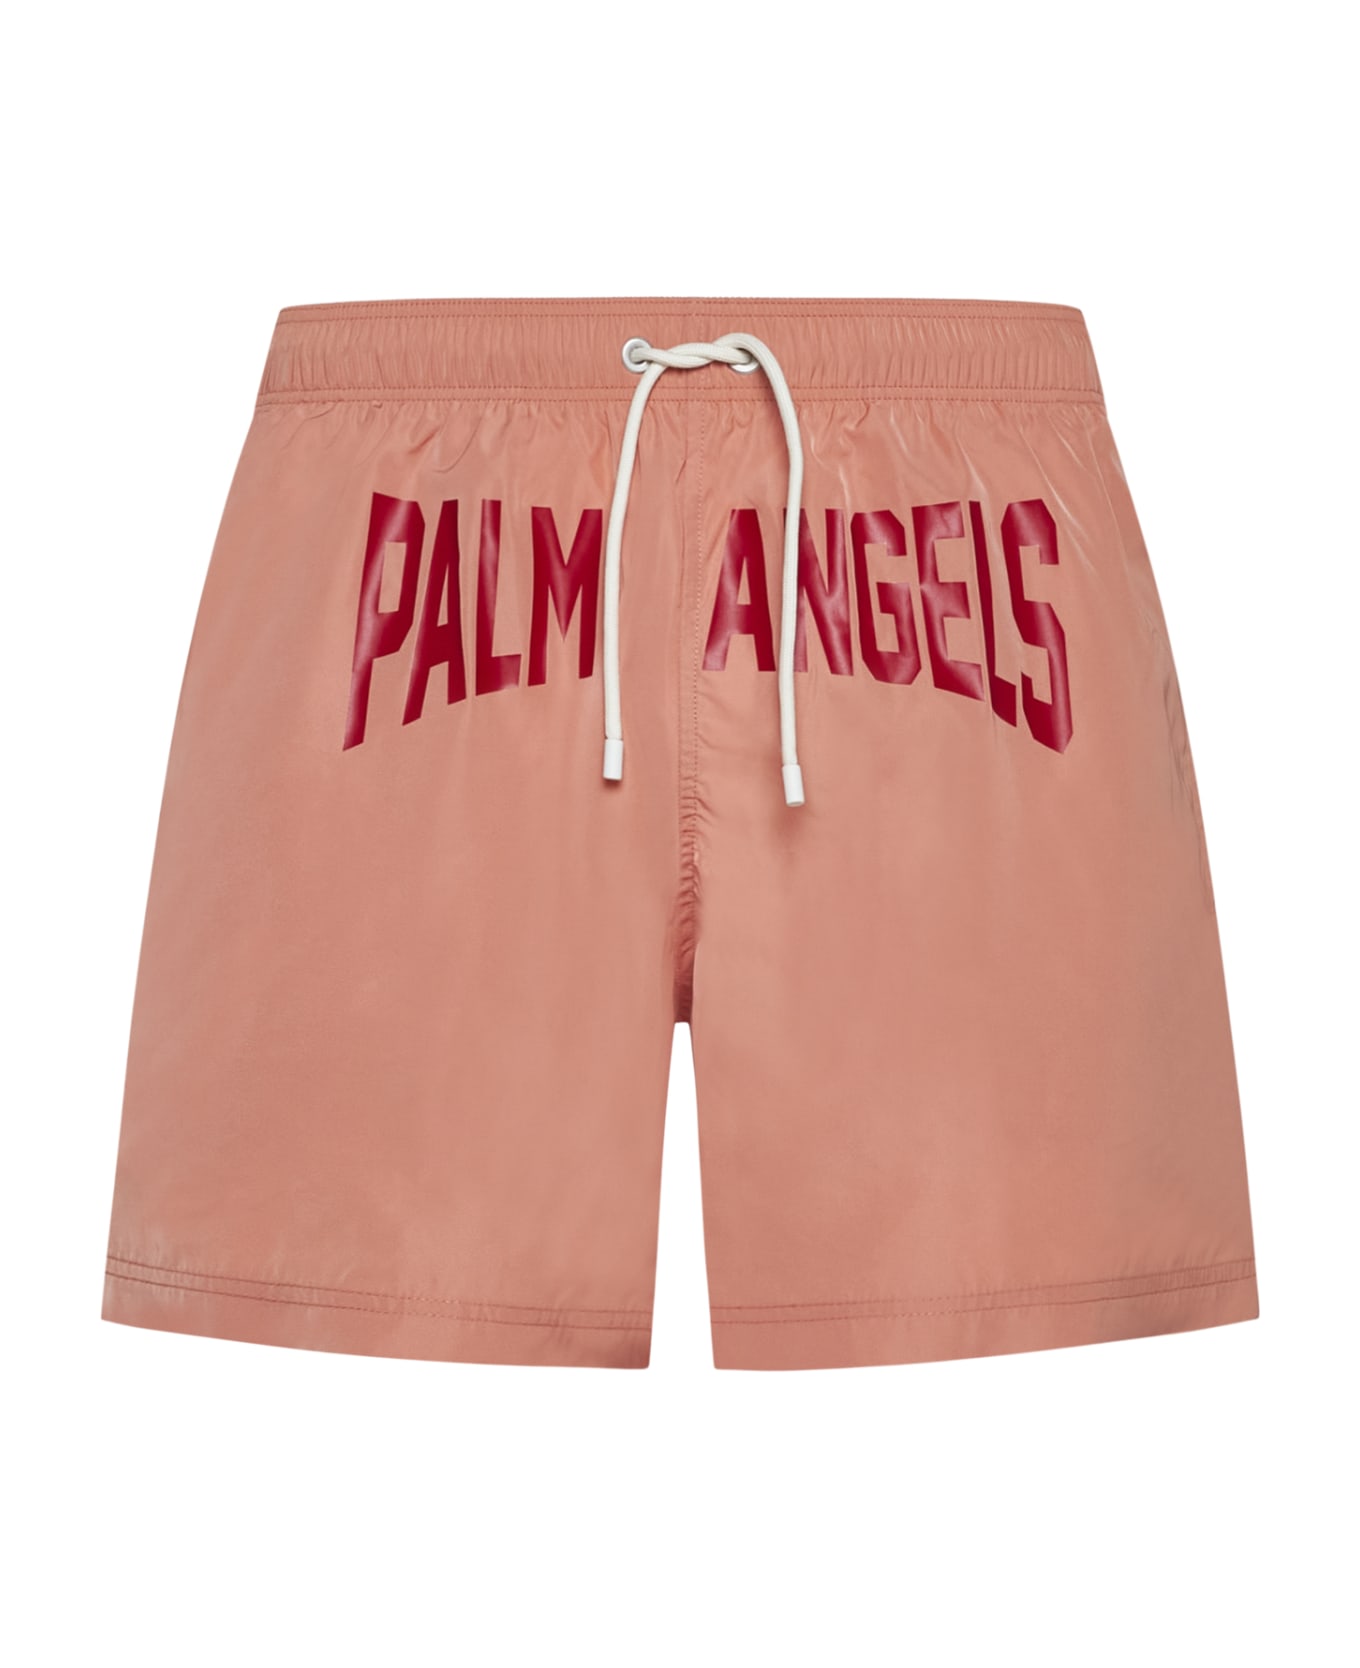 Palm Angels City Swimshort - Pink Red